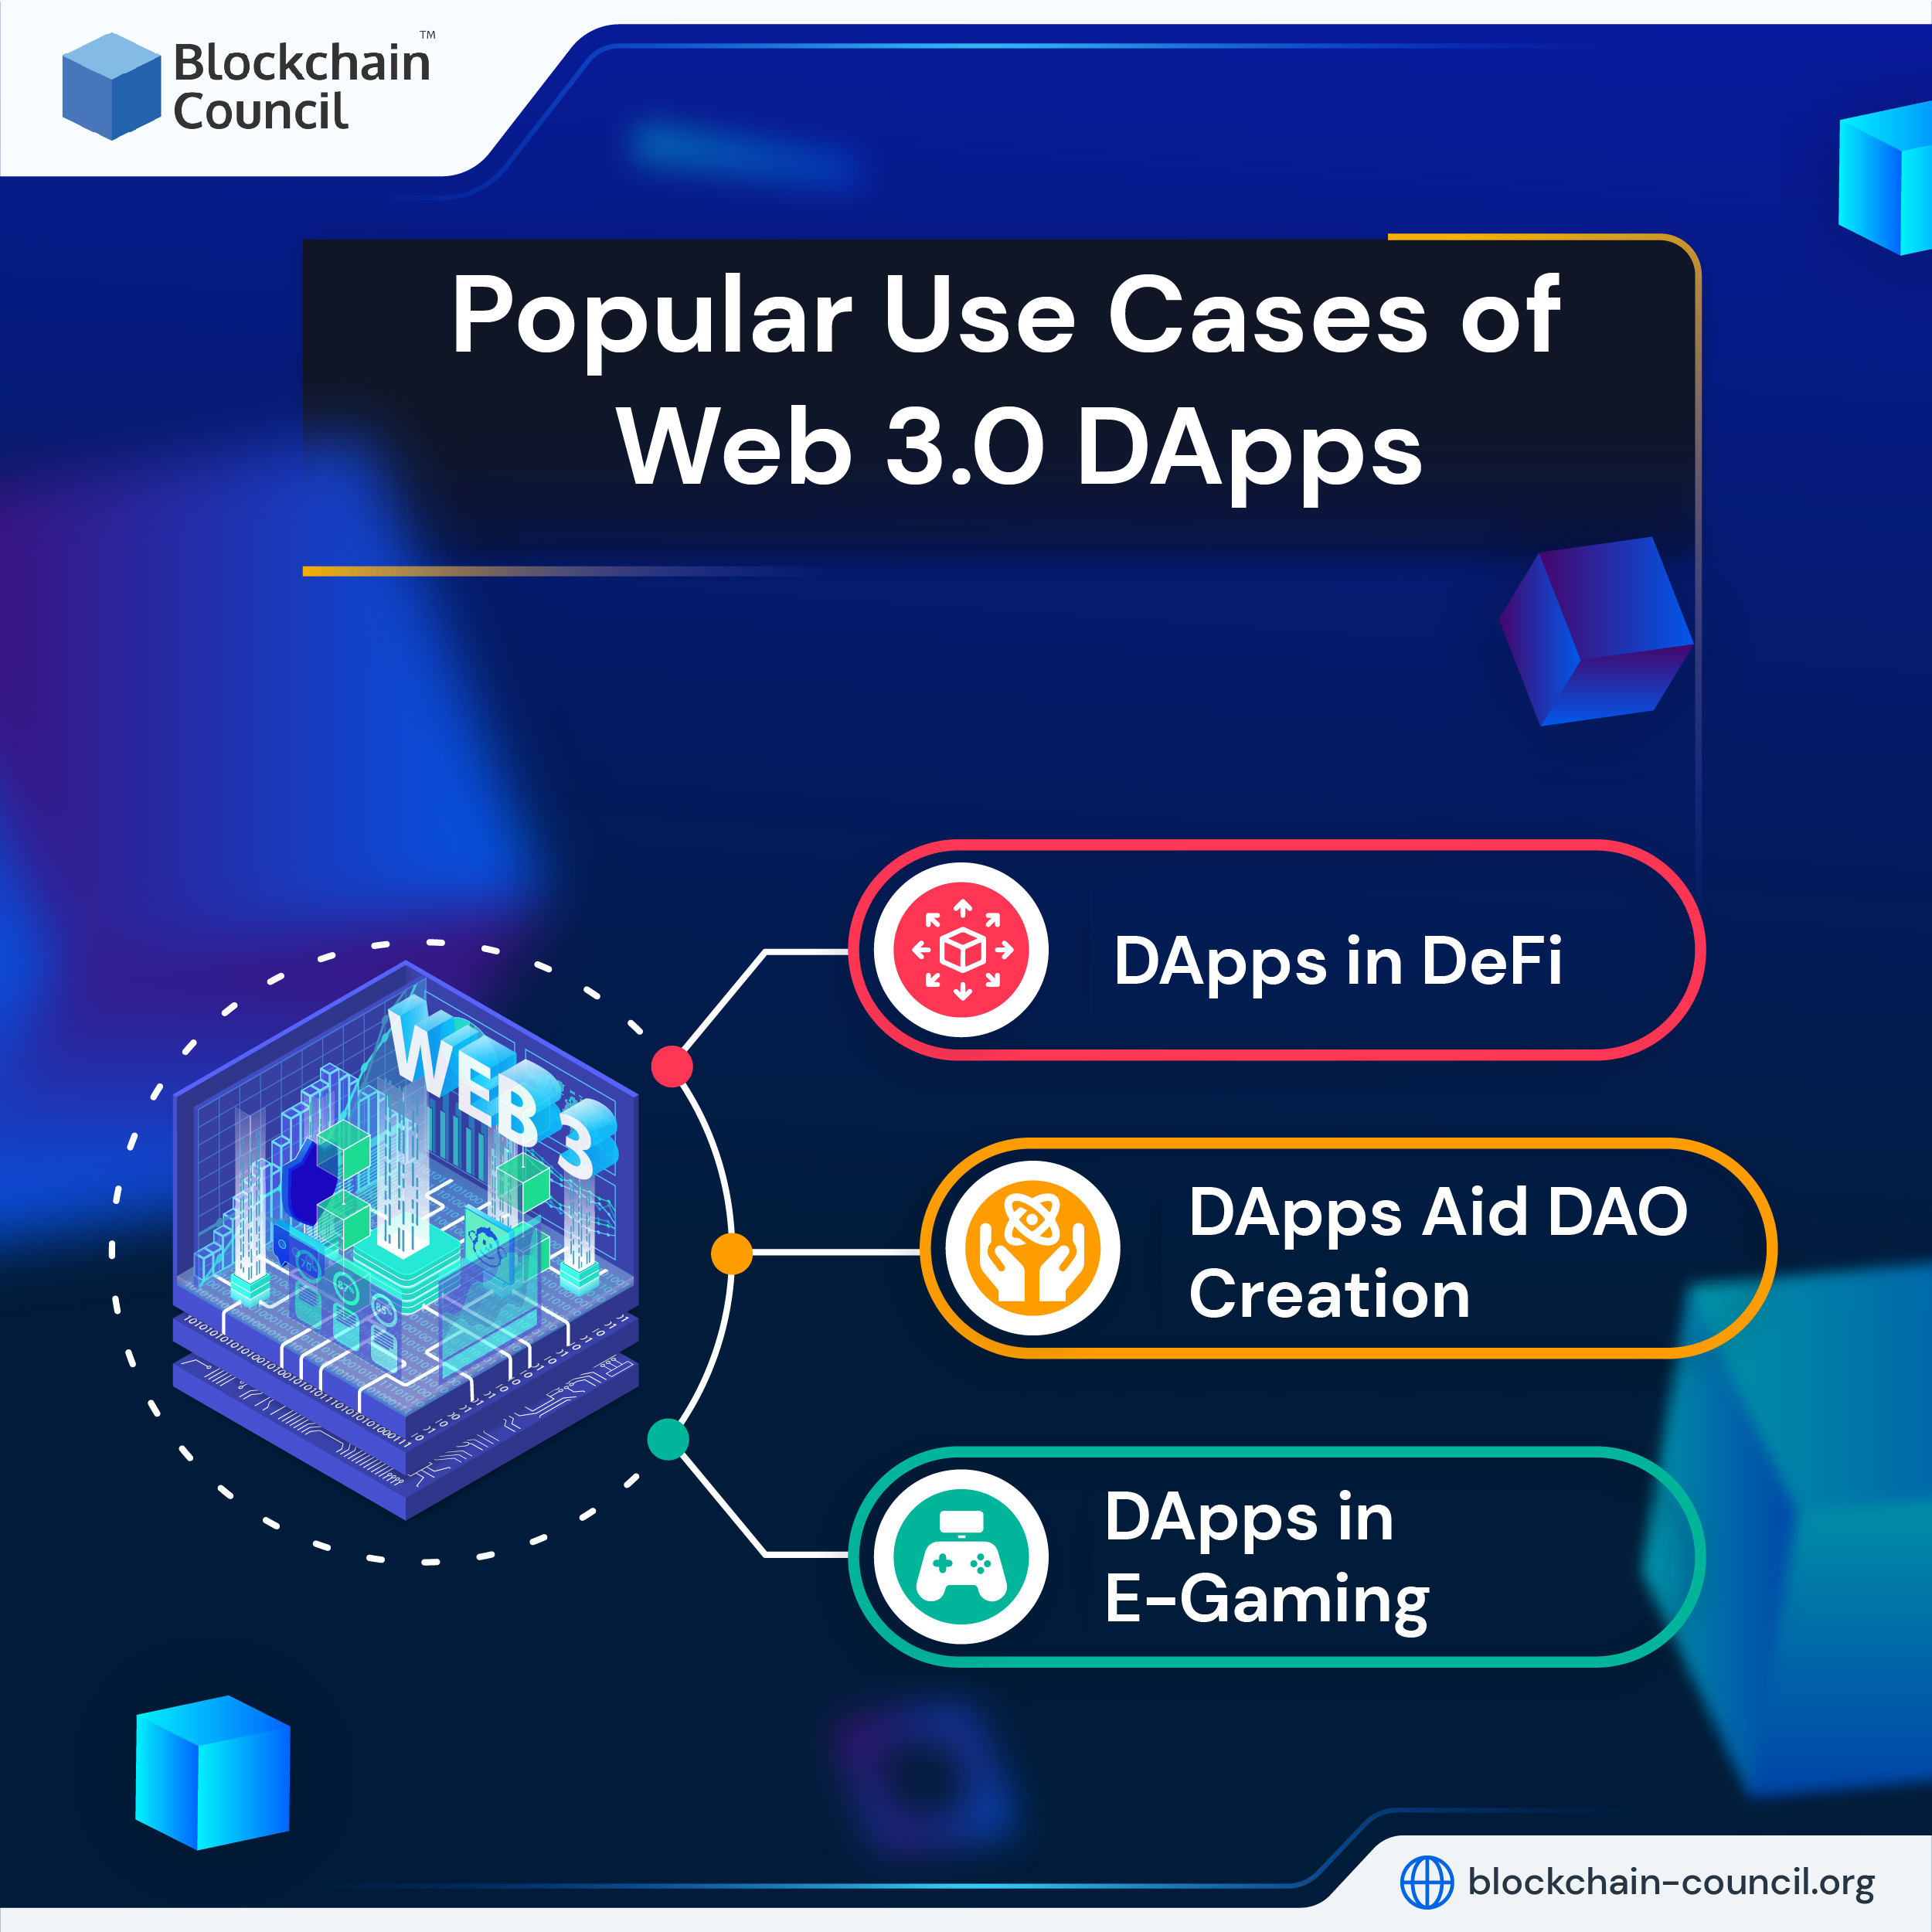 Popular Use Cases of Web 3.0 DApps